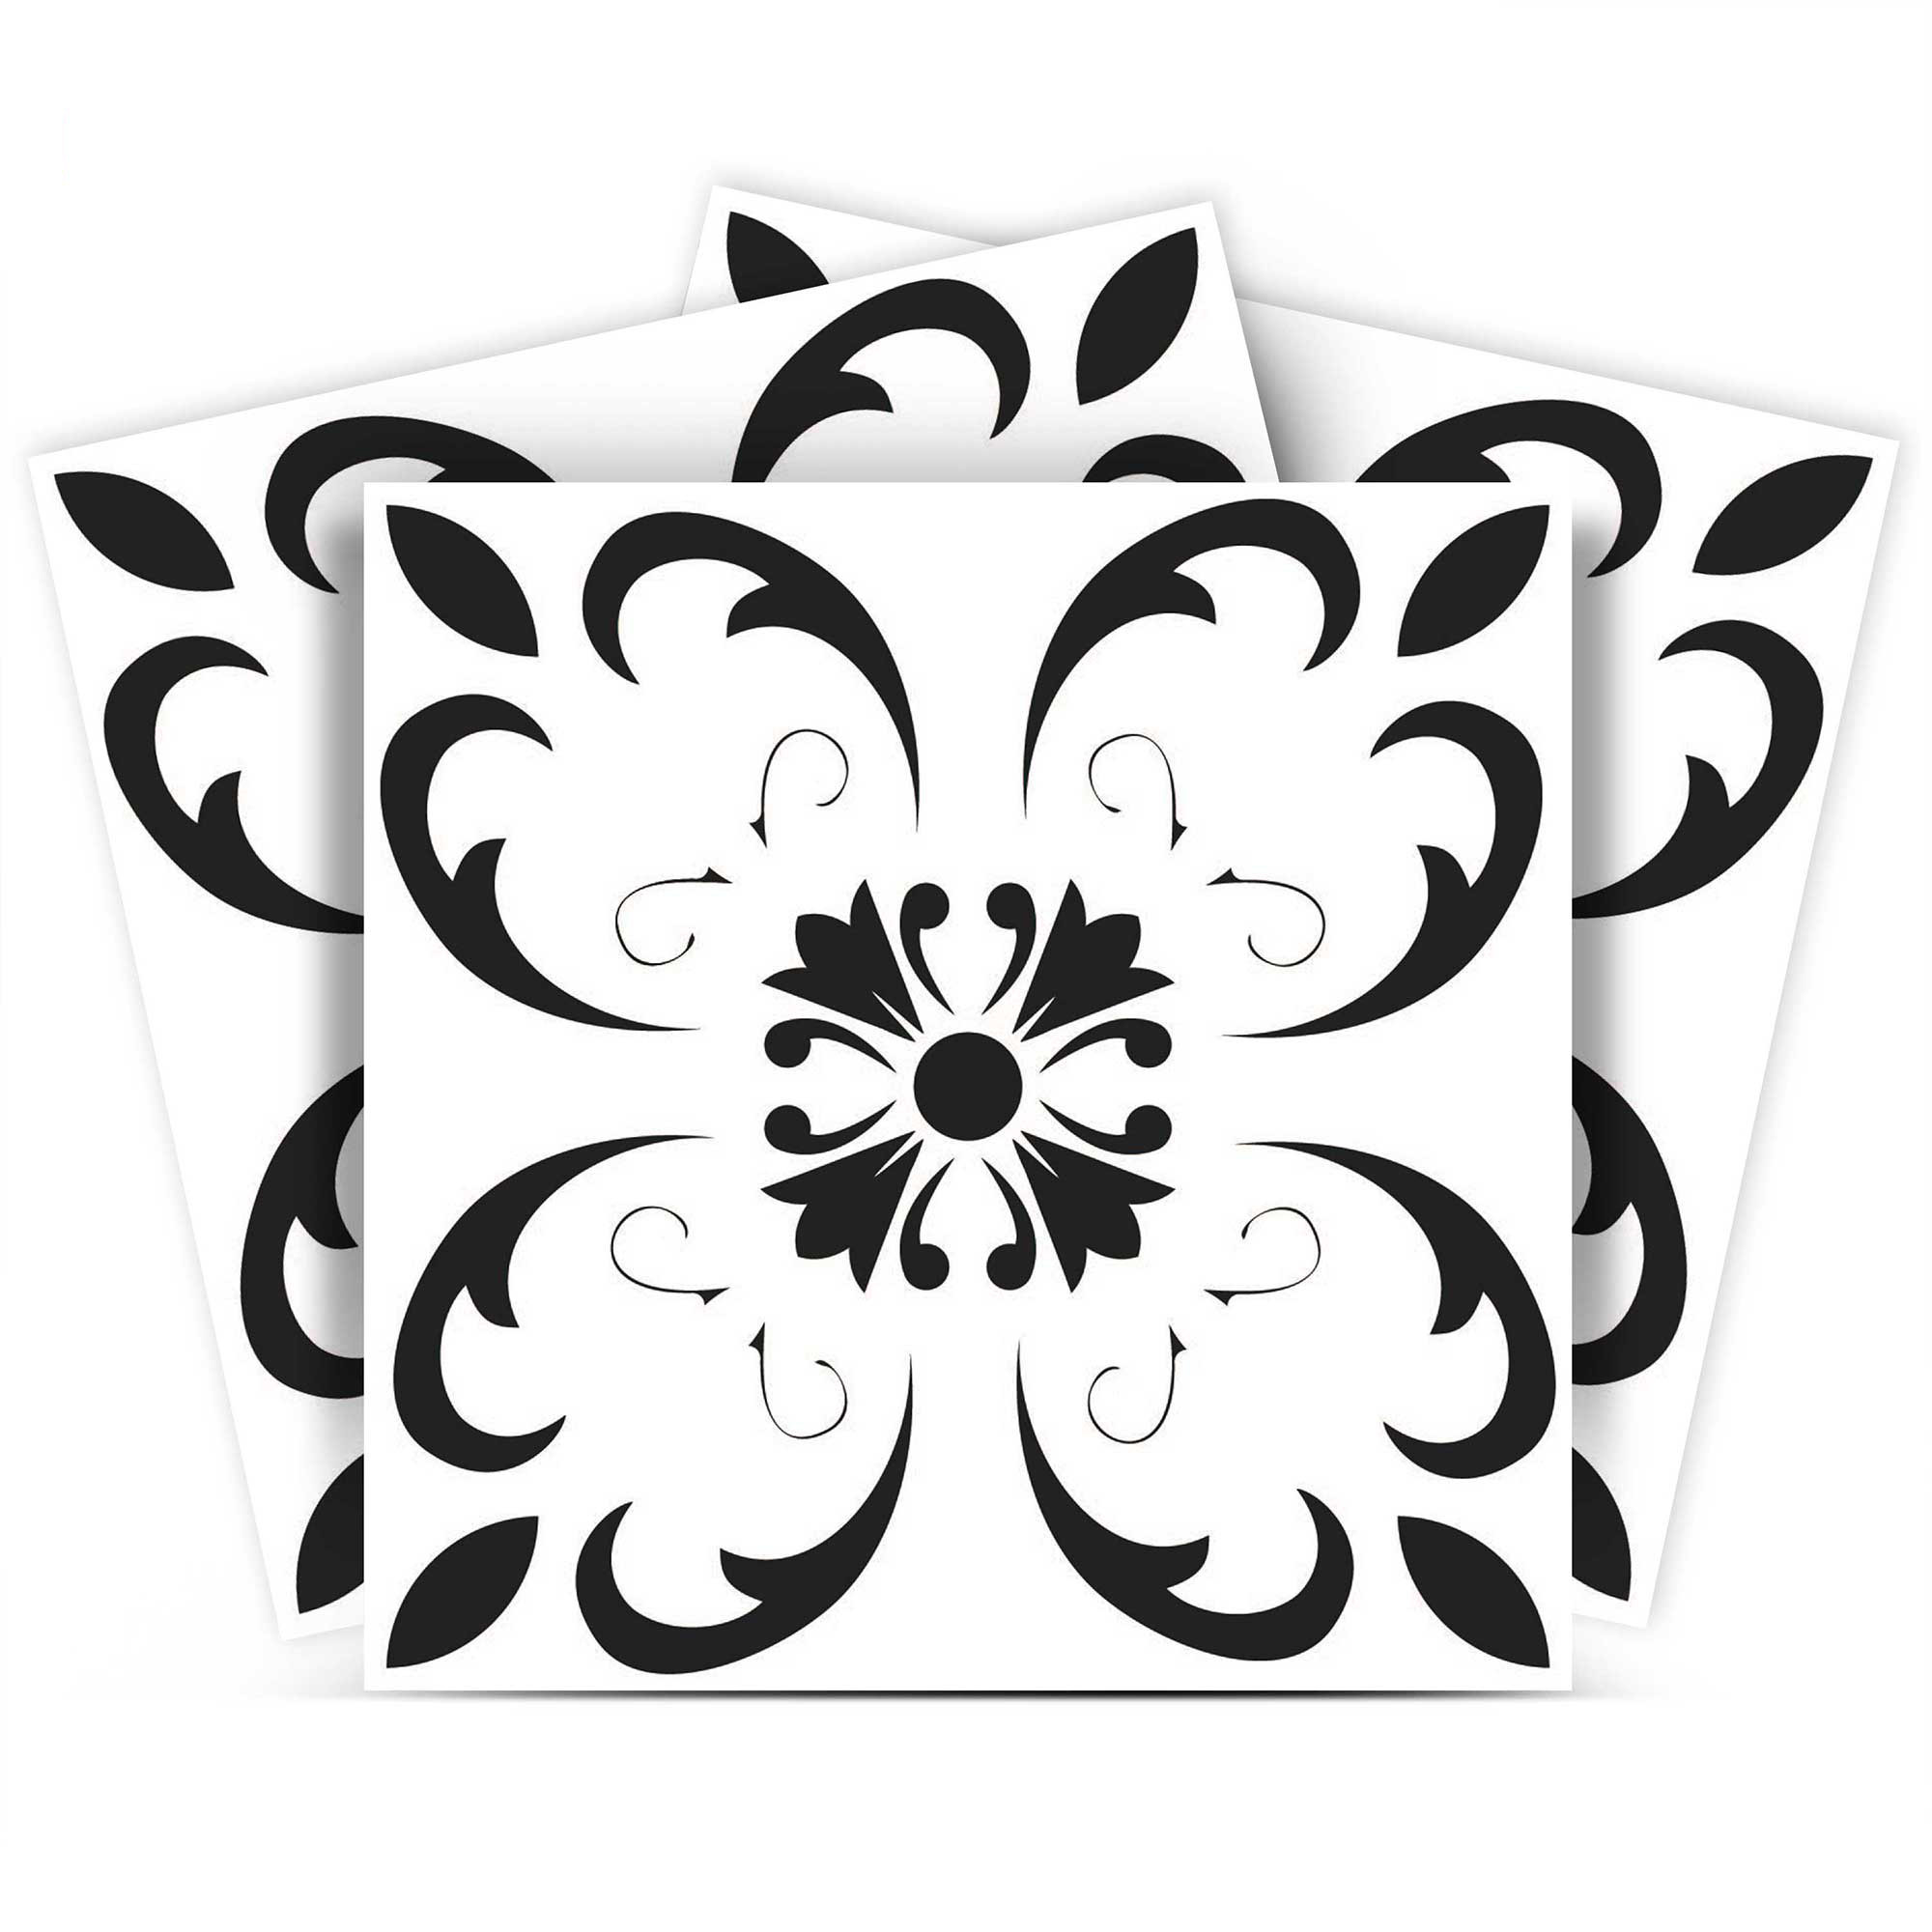 6" X 6" Black and White Delia Peel and Stick Removable Tiles-399892-1